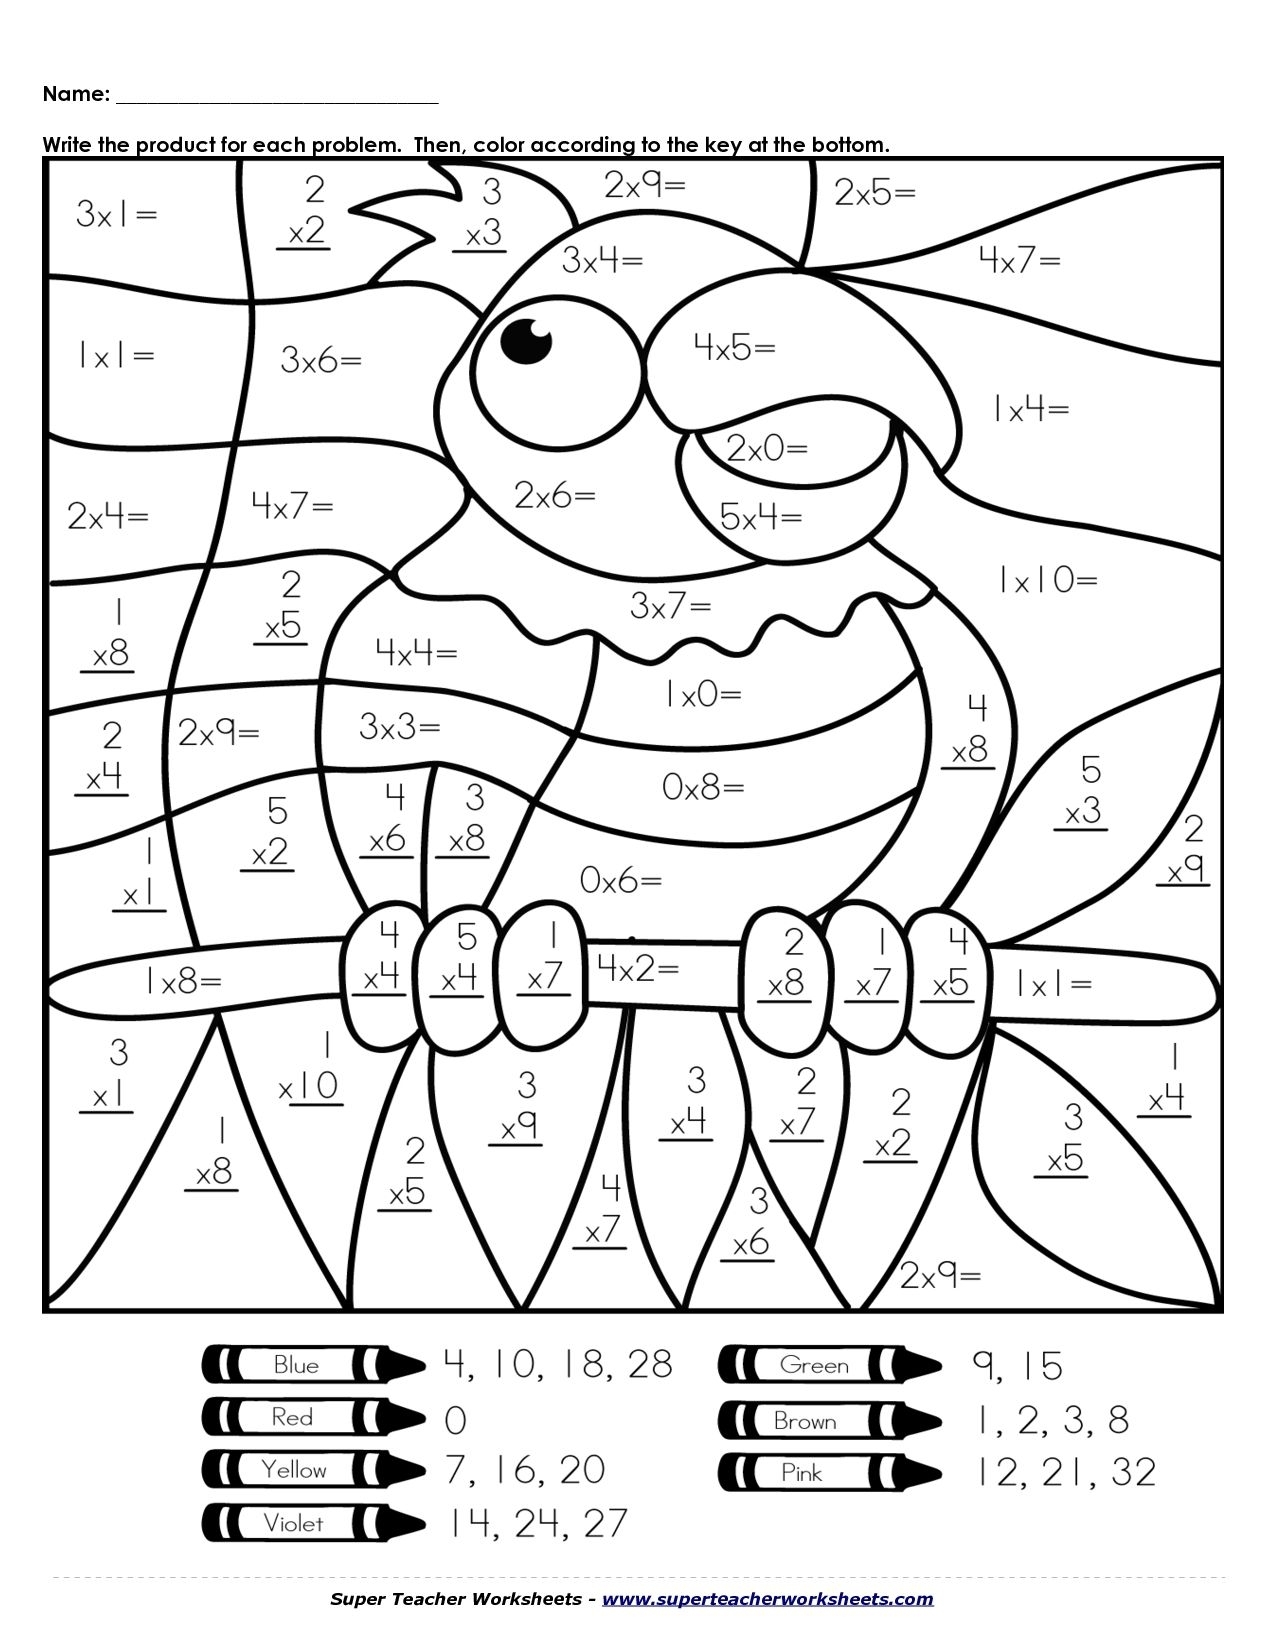 Multiplication Coloring Page | Easy To Draw | Math Coloring in Grade R Cover Page Colouring Page